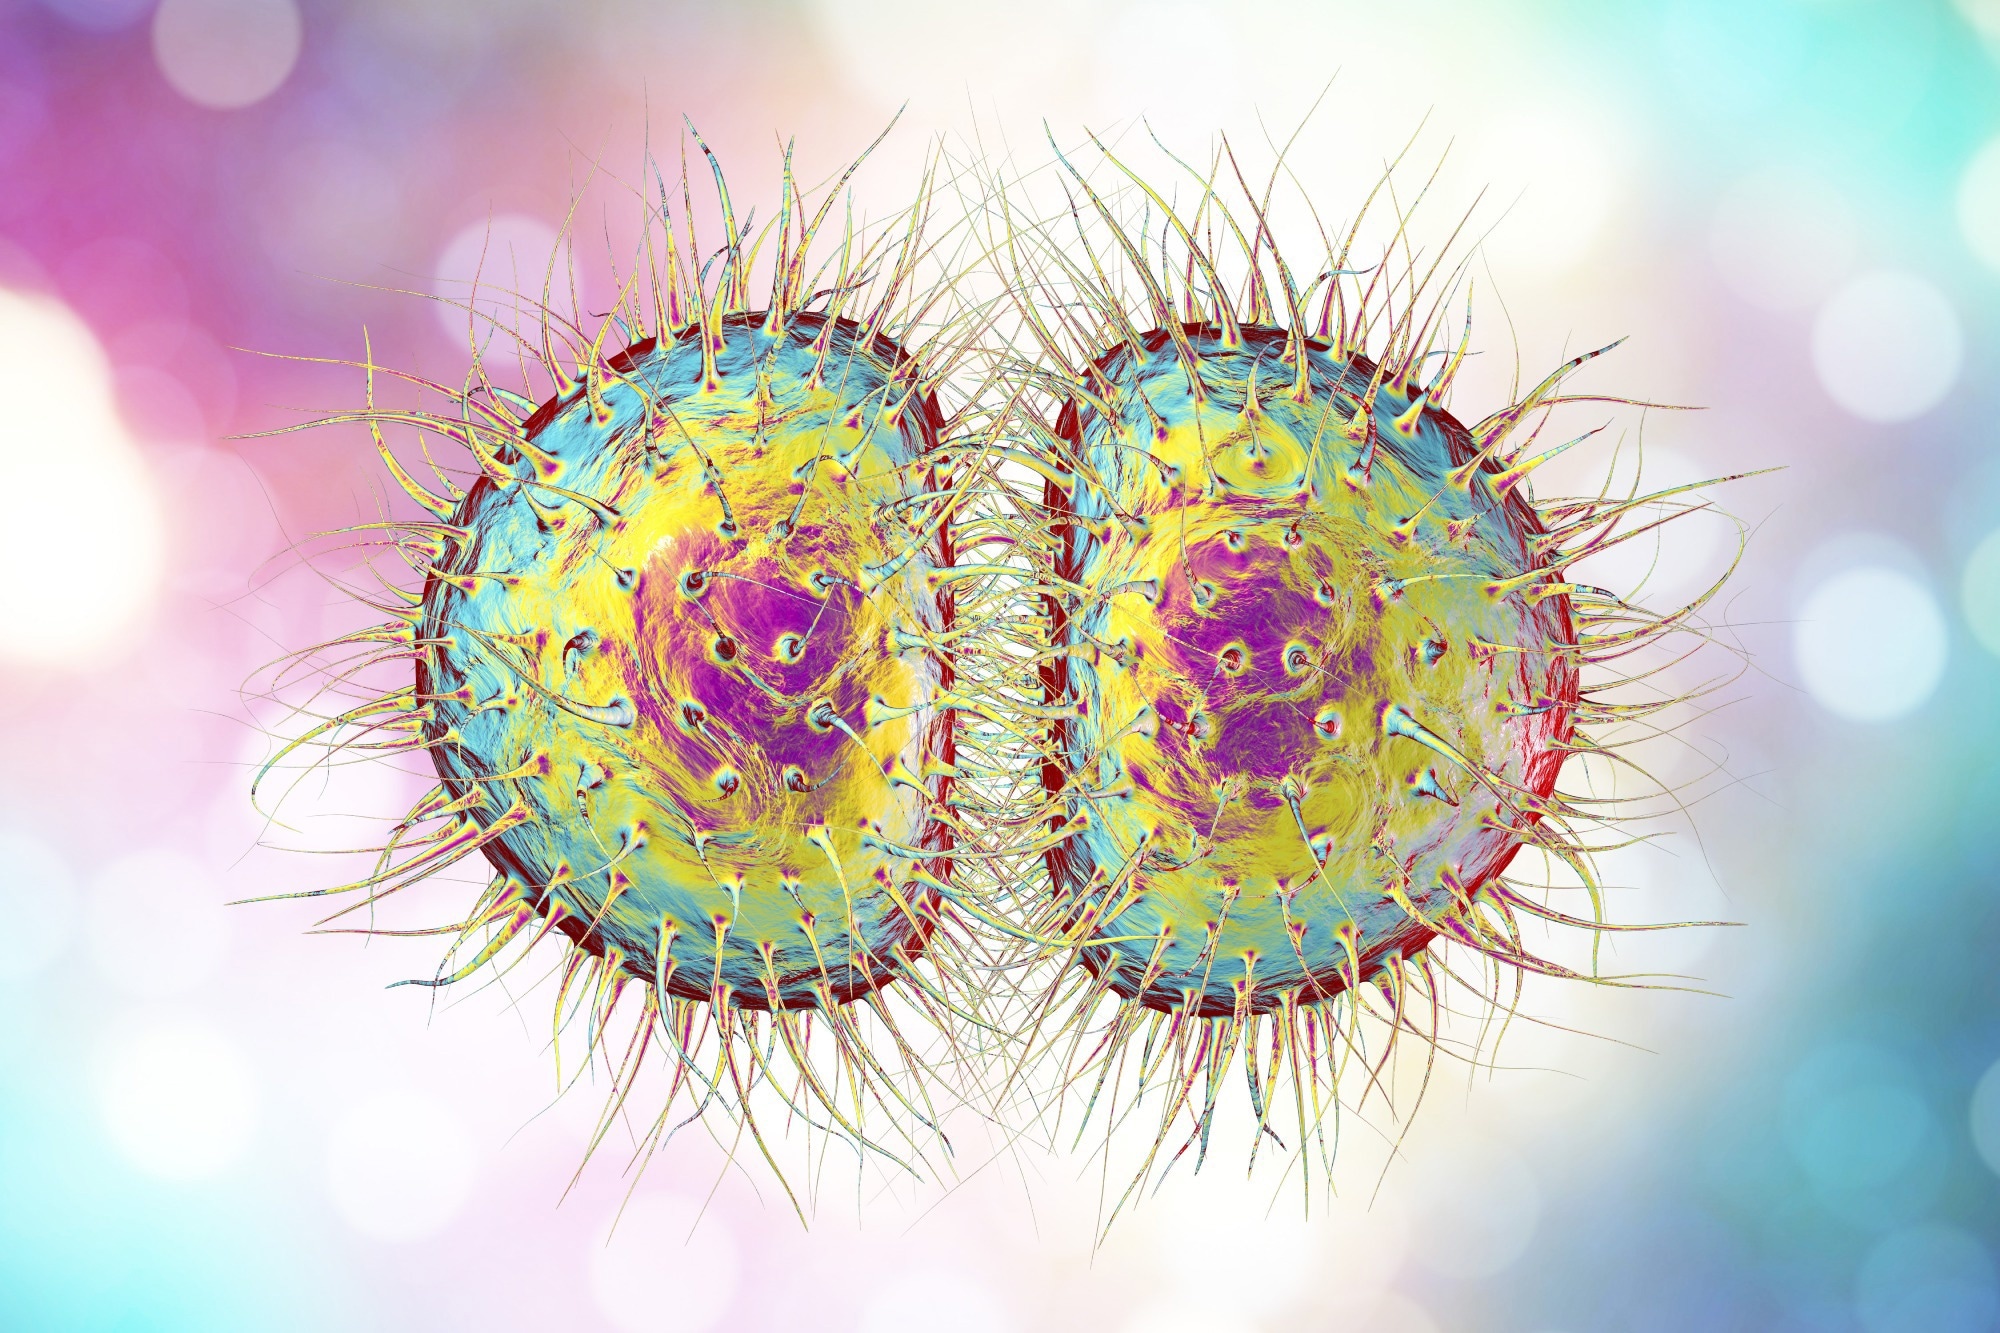 Rapid communication: Sharp increase in gonorrhoea notifications among young people, EU/EEA, July 2022 to June 2023. Image Credit: Kateryna Kon / Shutterstock